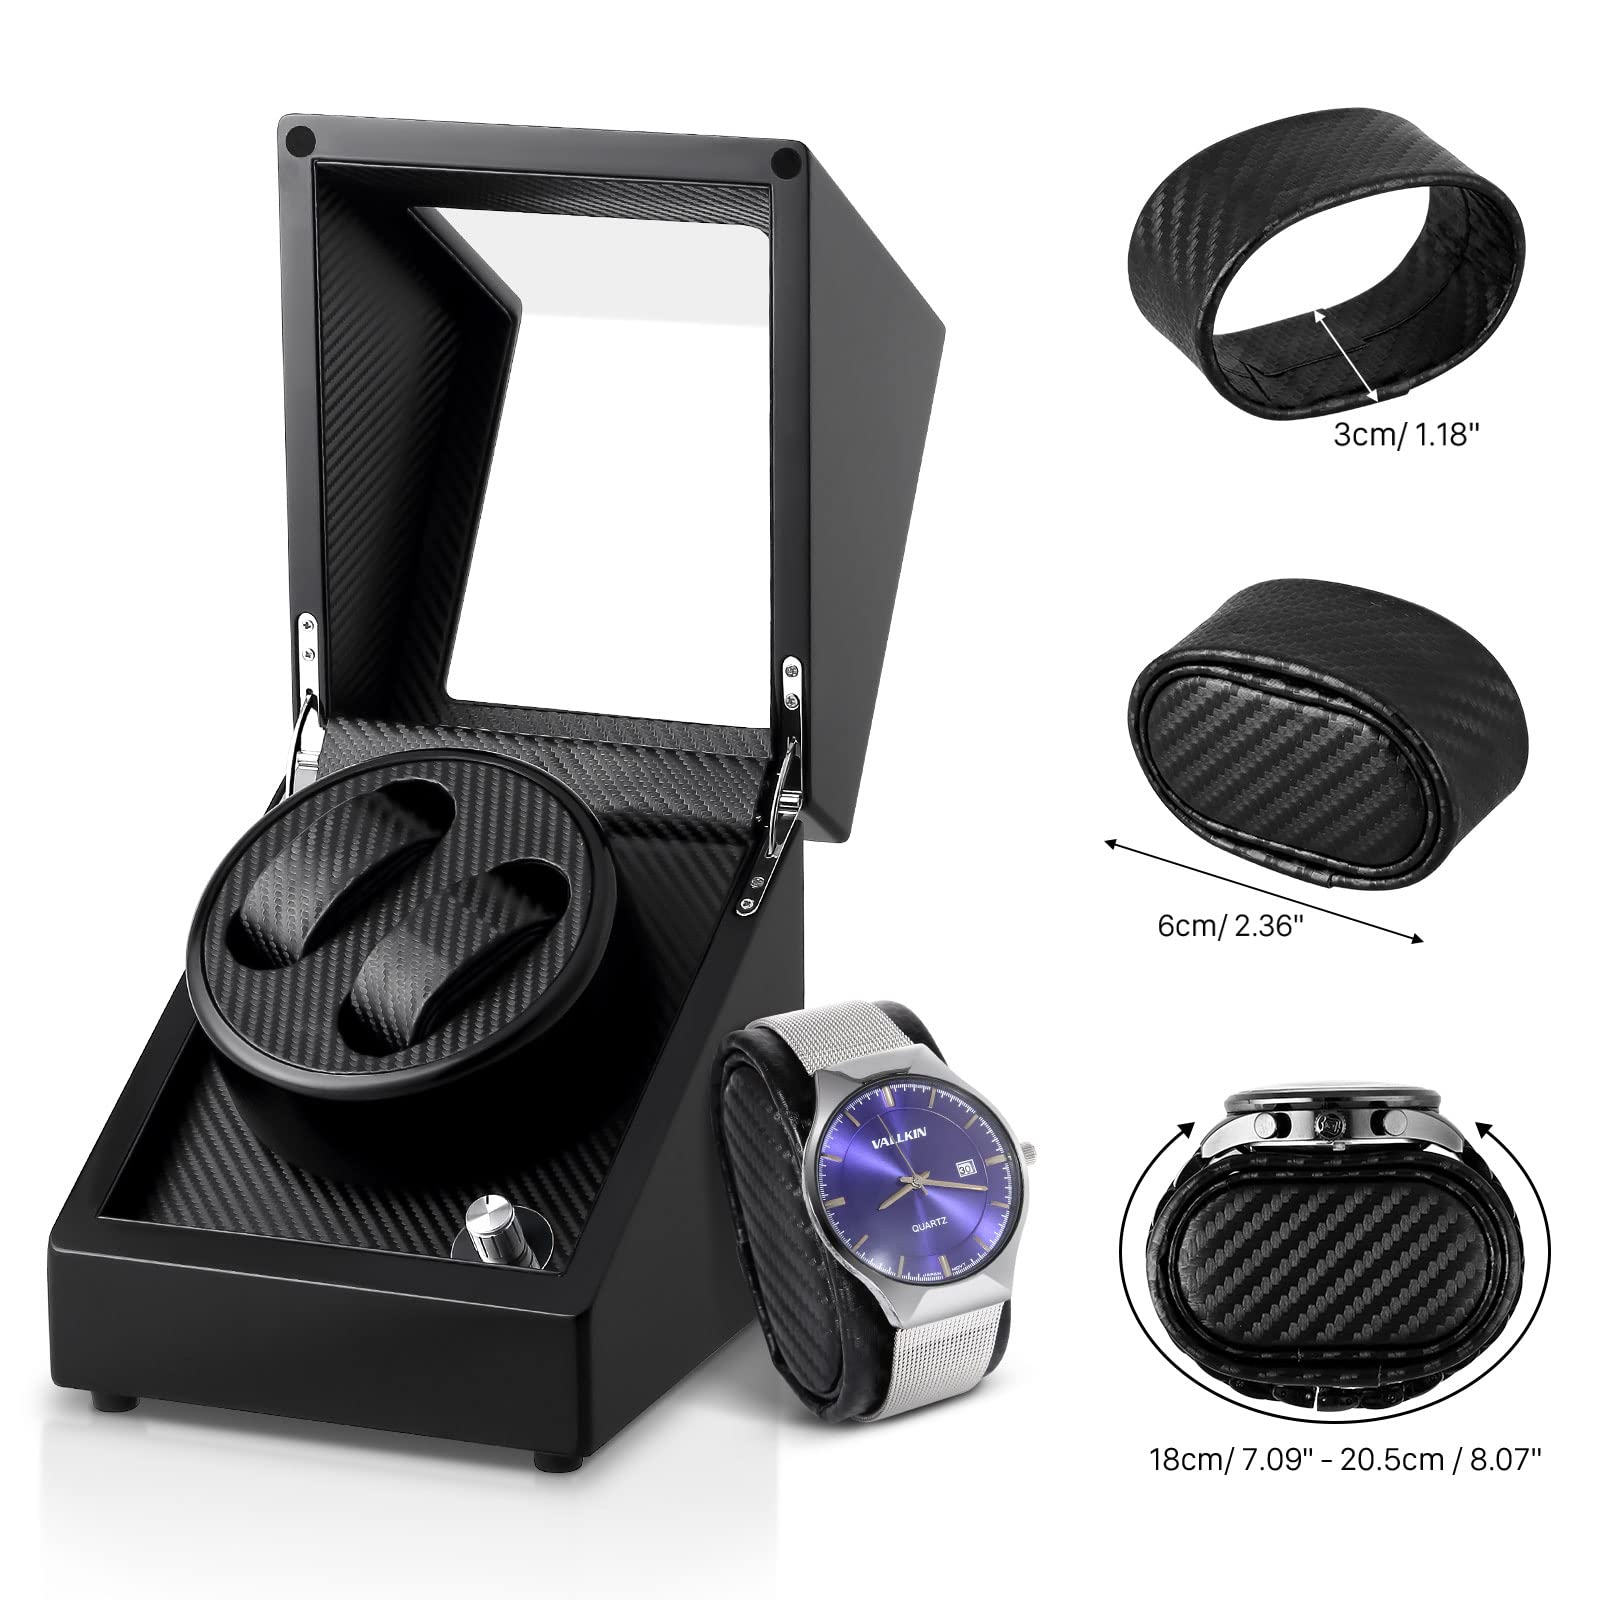 Uten Automatic Double Watch Winder Box, Luxury Wooden Storage Case for Mechanical Watch Winder with Quiet Motor 5 Rotation Mode, Black.